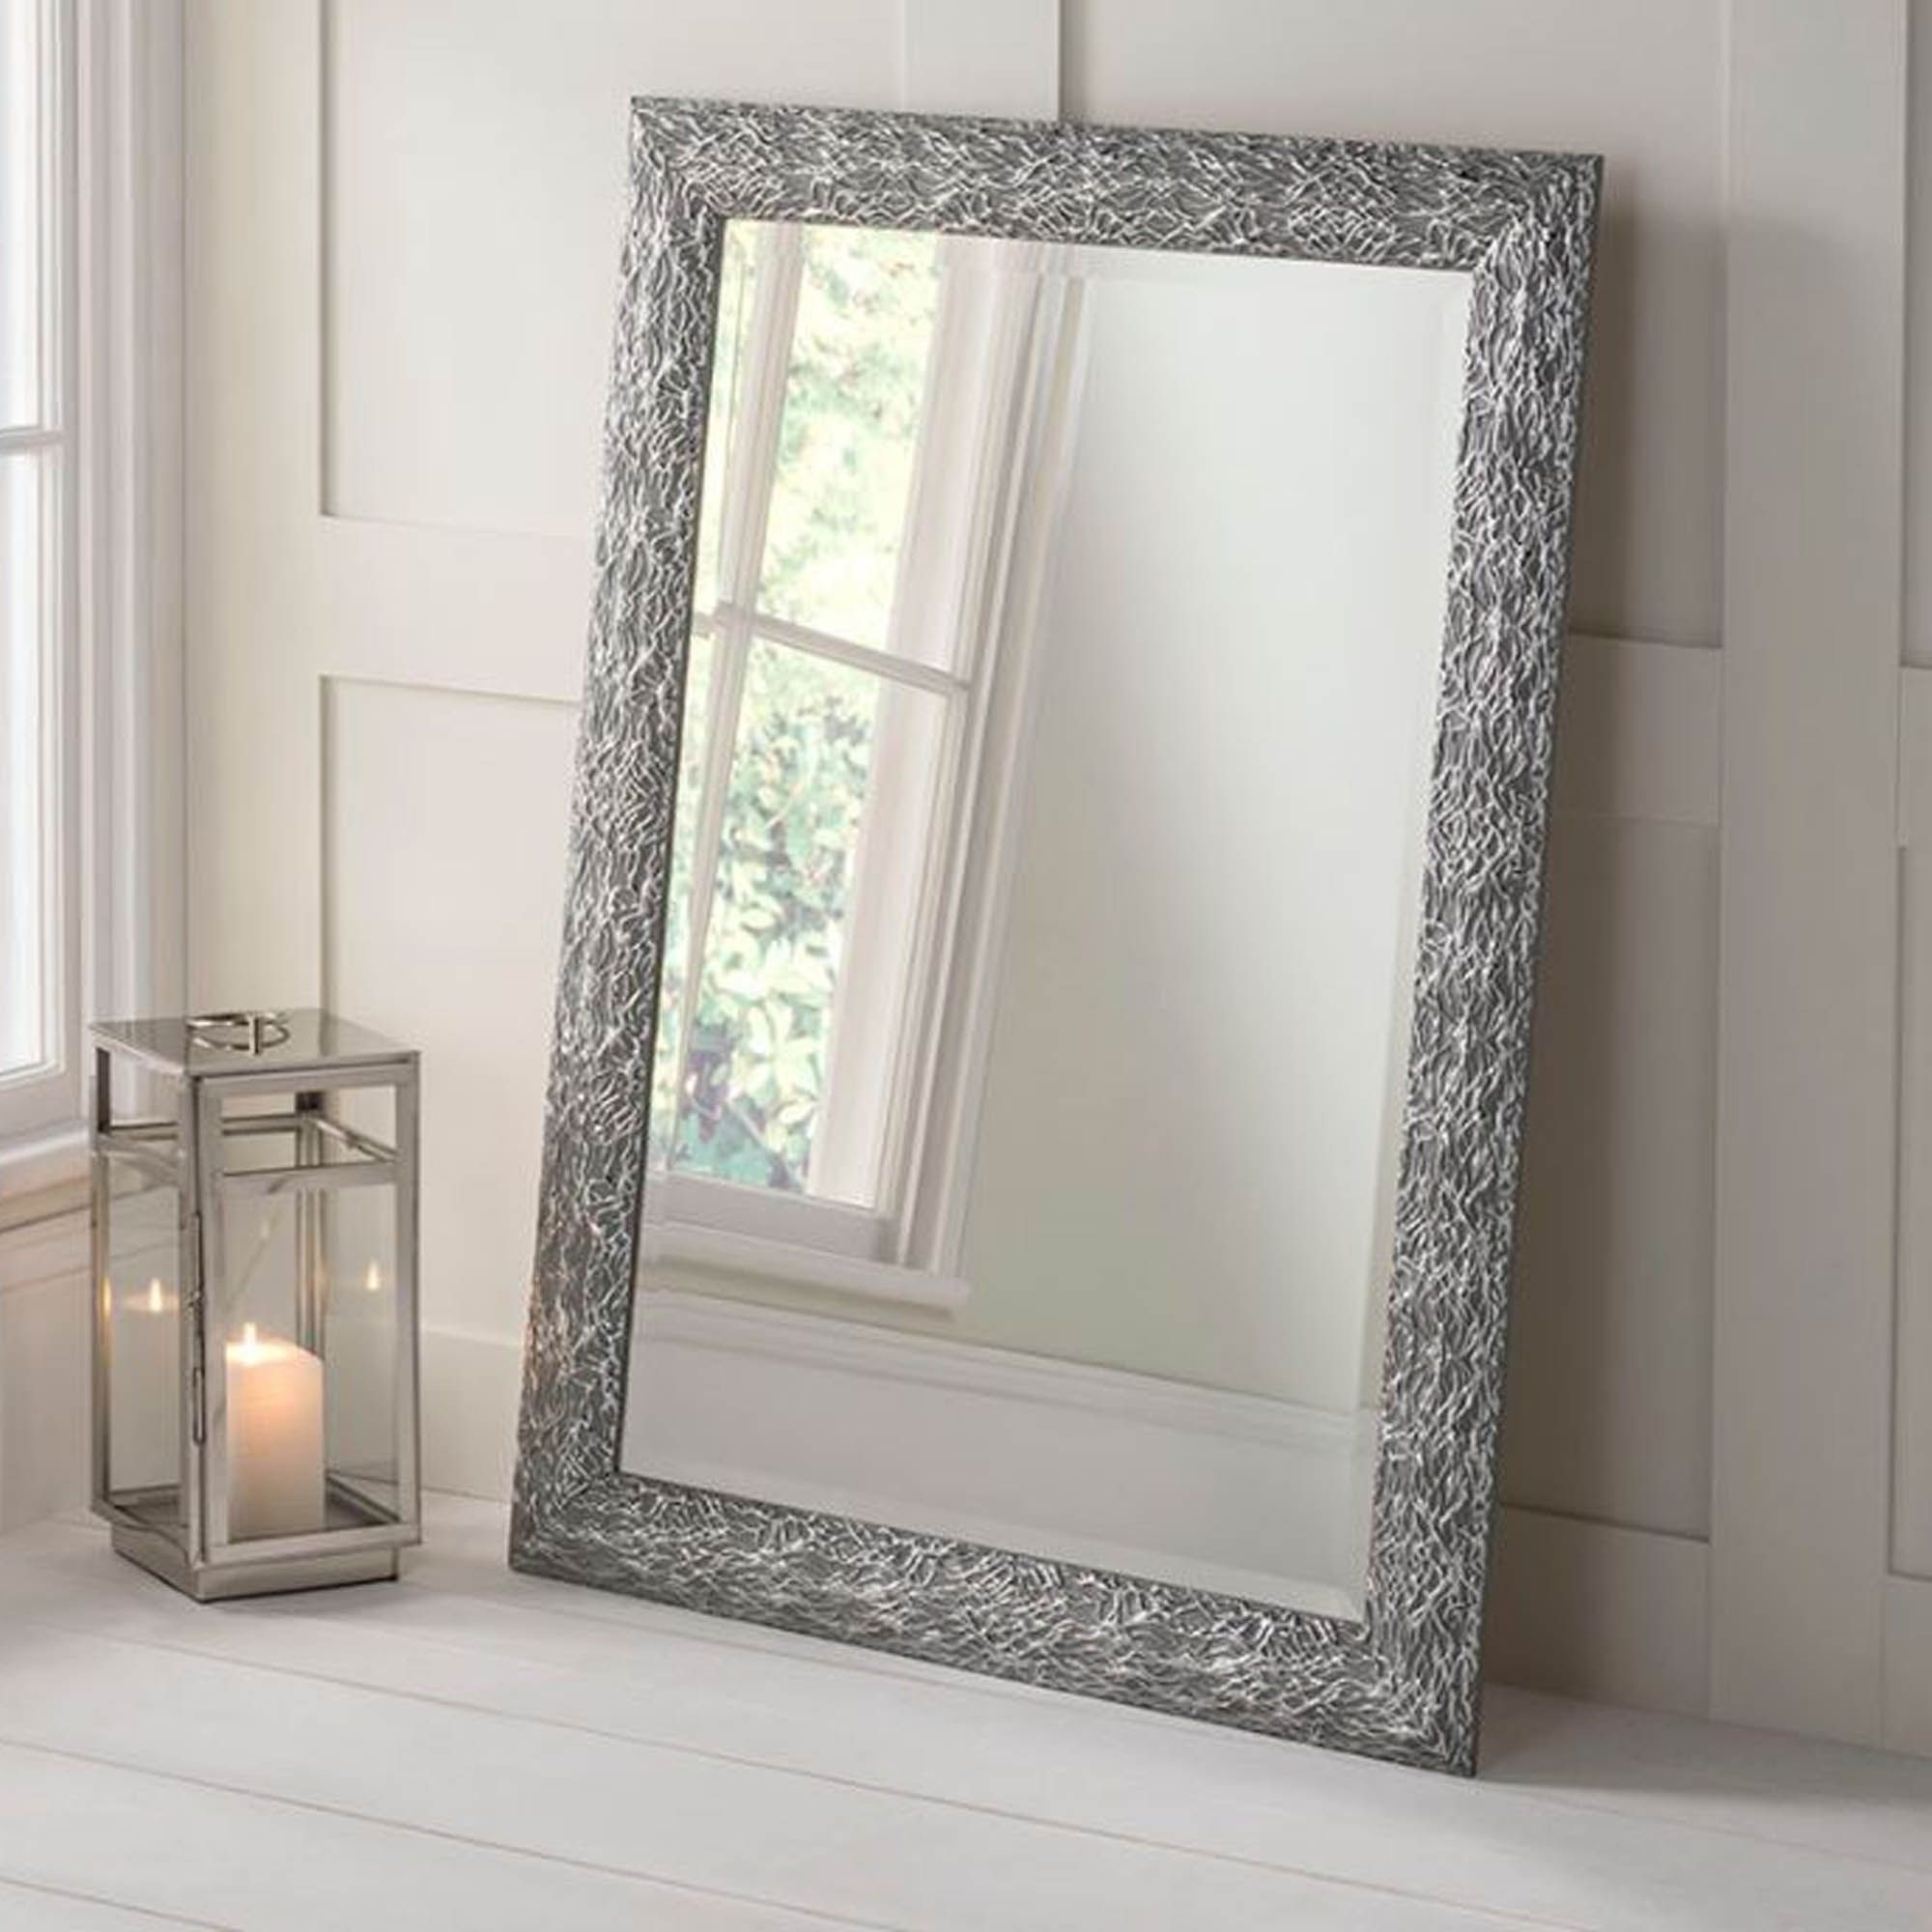 Detailed Rectangular Grey And Silver Wall Mirror | Hd365 In Silver Asymmetrical Wall Mirrors (View 4 of 15)